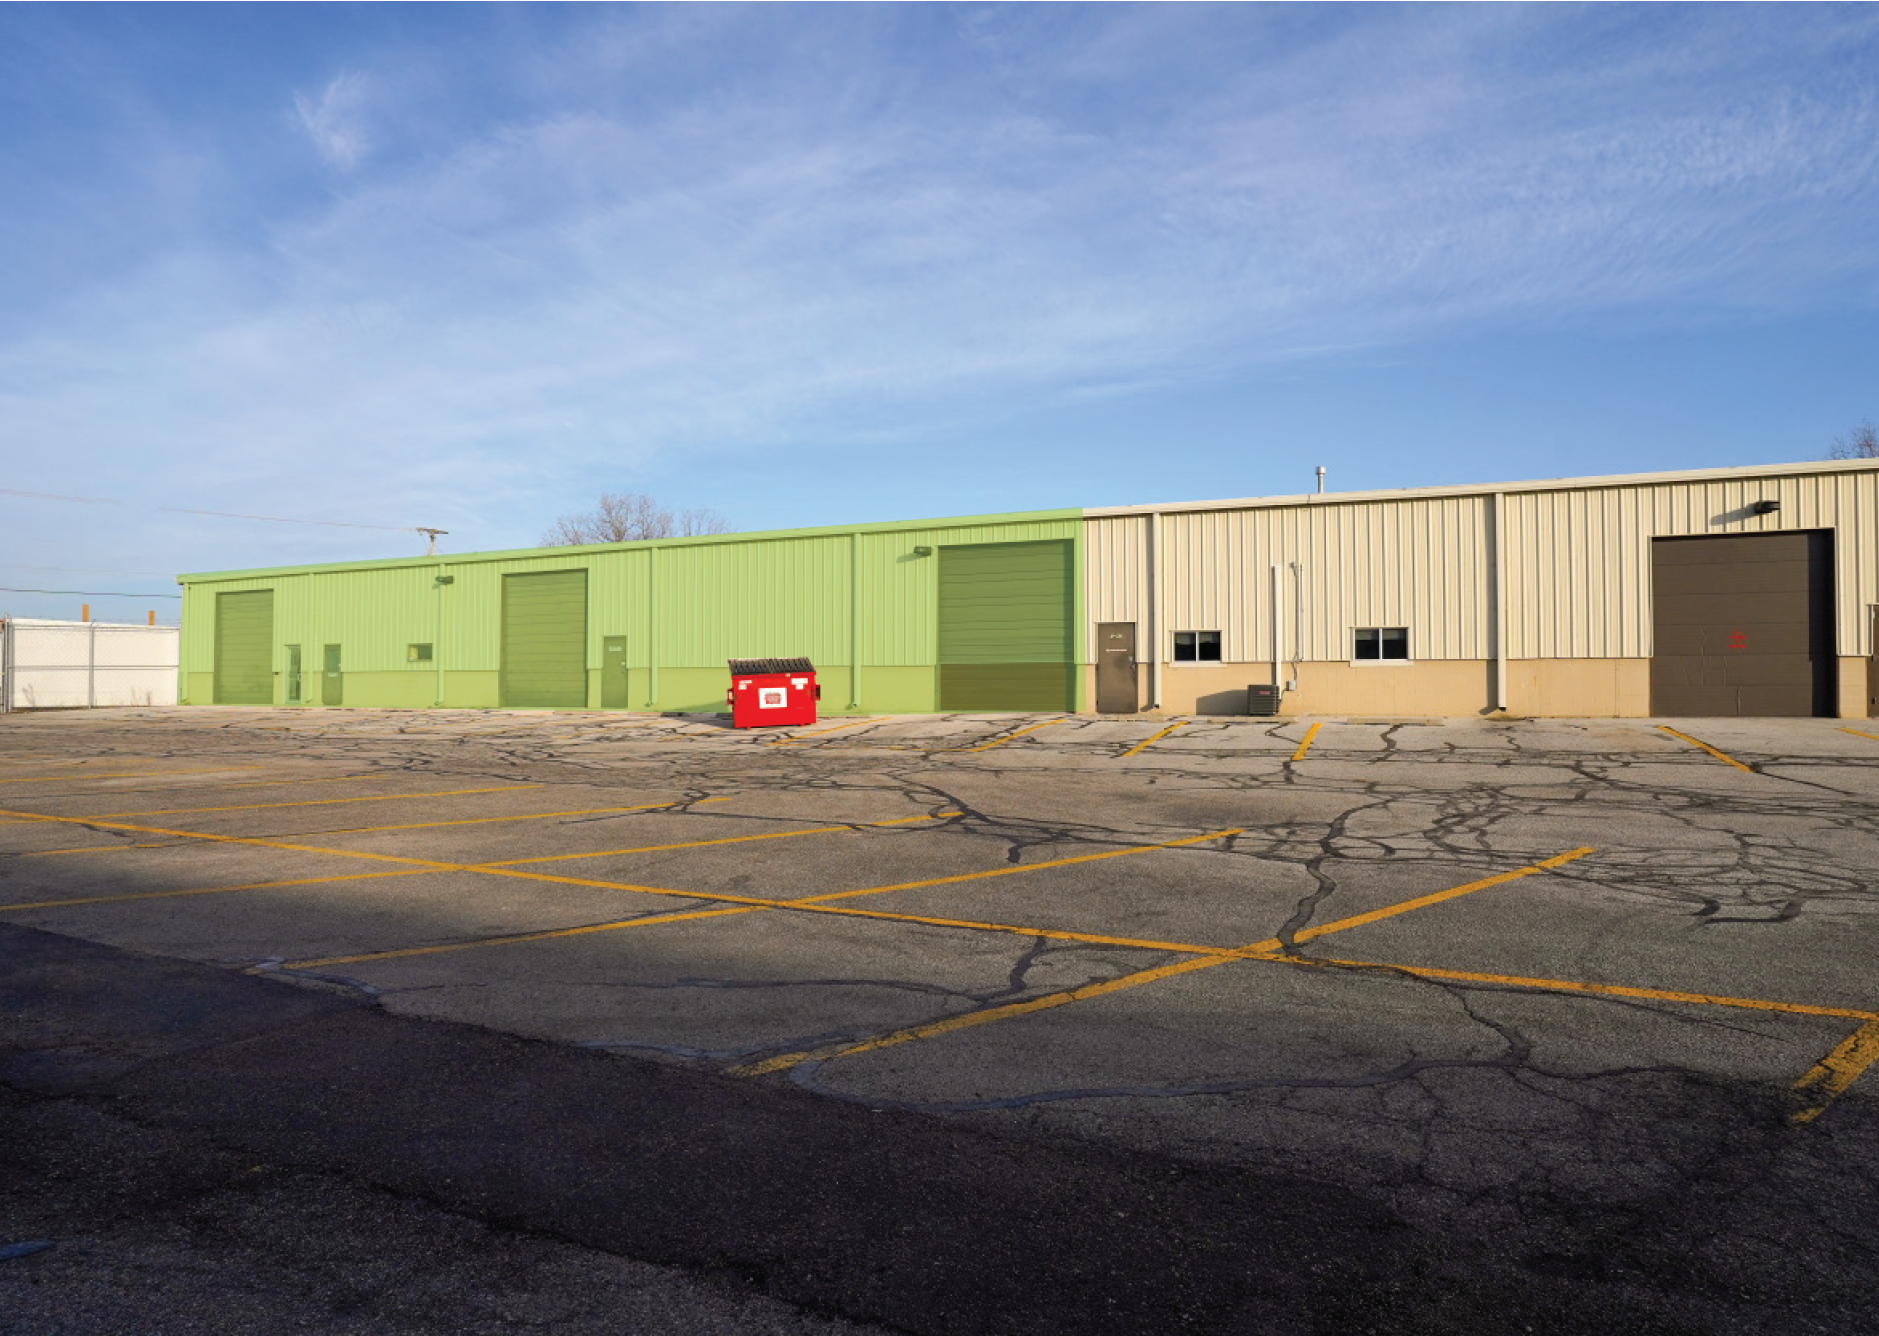 Sturges Property Group - Keystone Industrial Park Fort Wayne Indiana Industrial Space For Lease